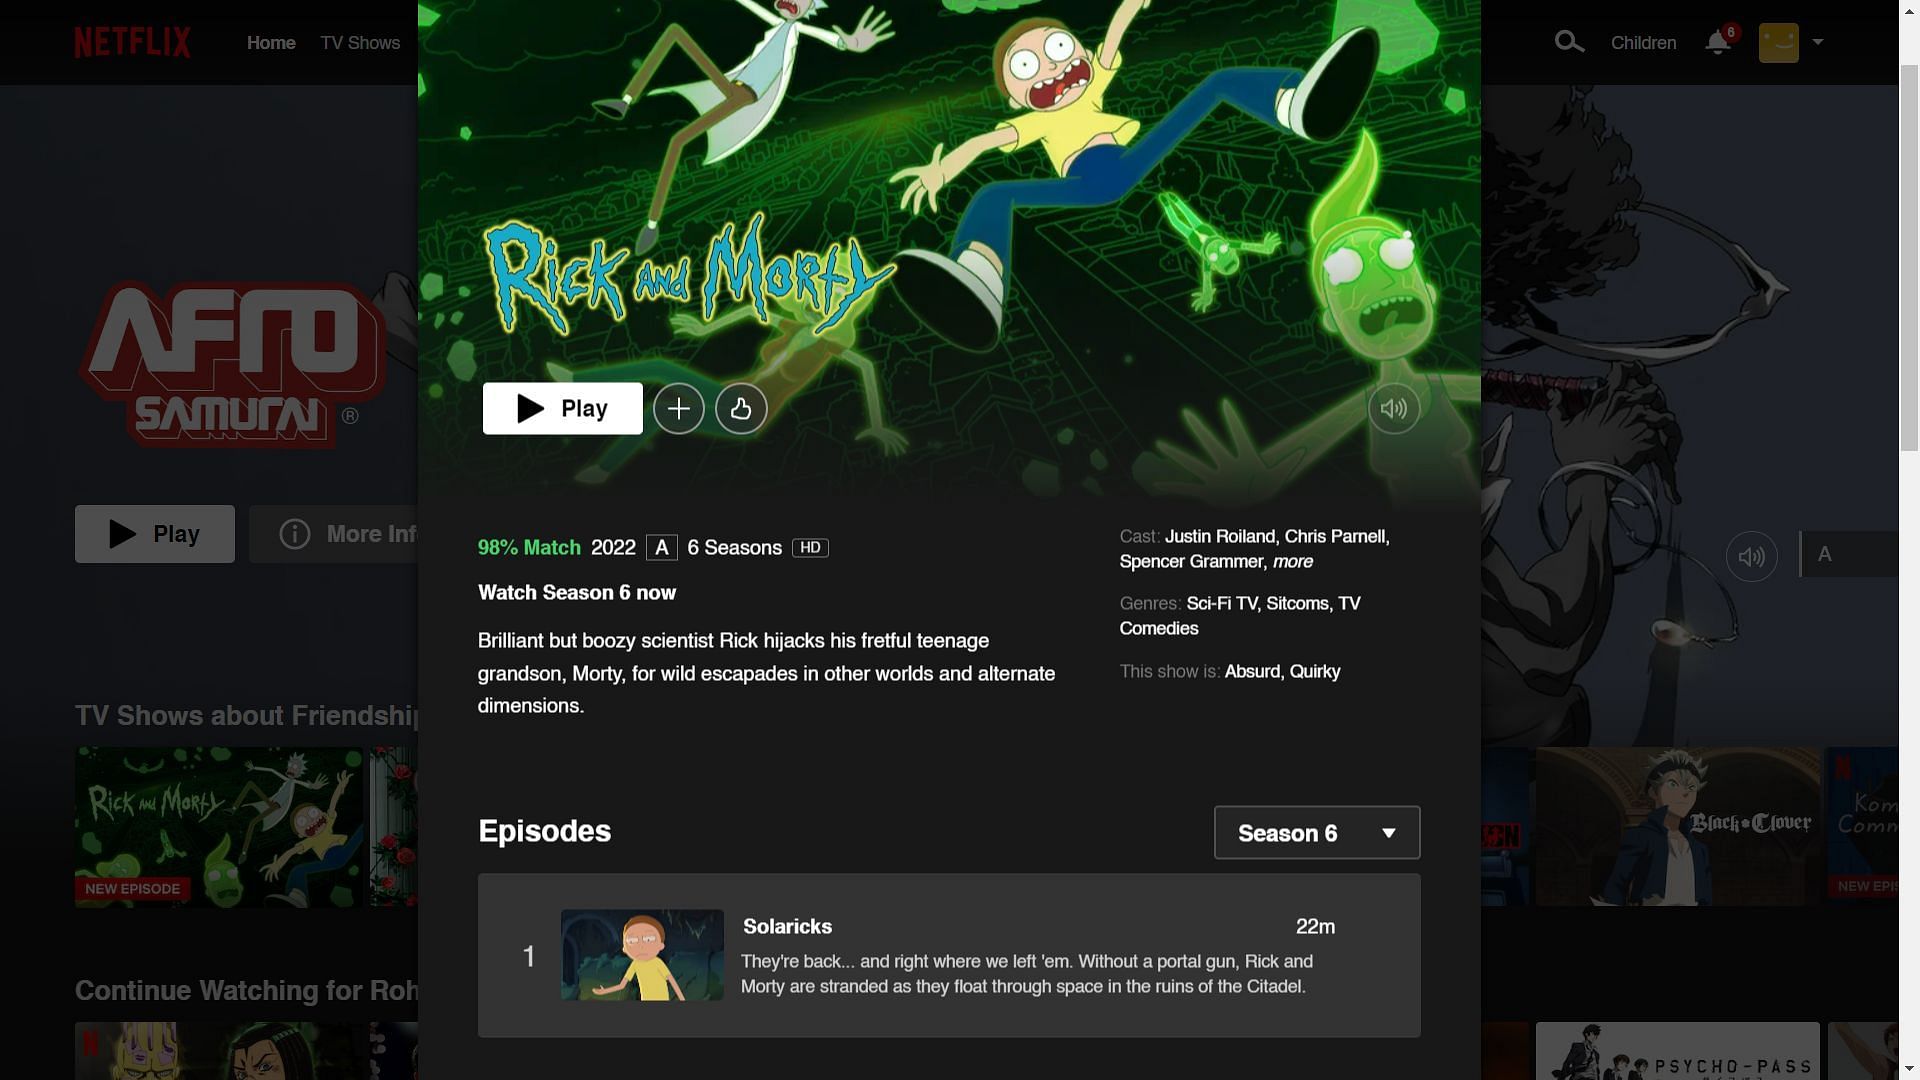 Rick and Morty is available on Netflix in India (Image via Netflix)